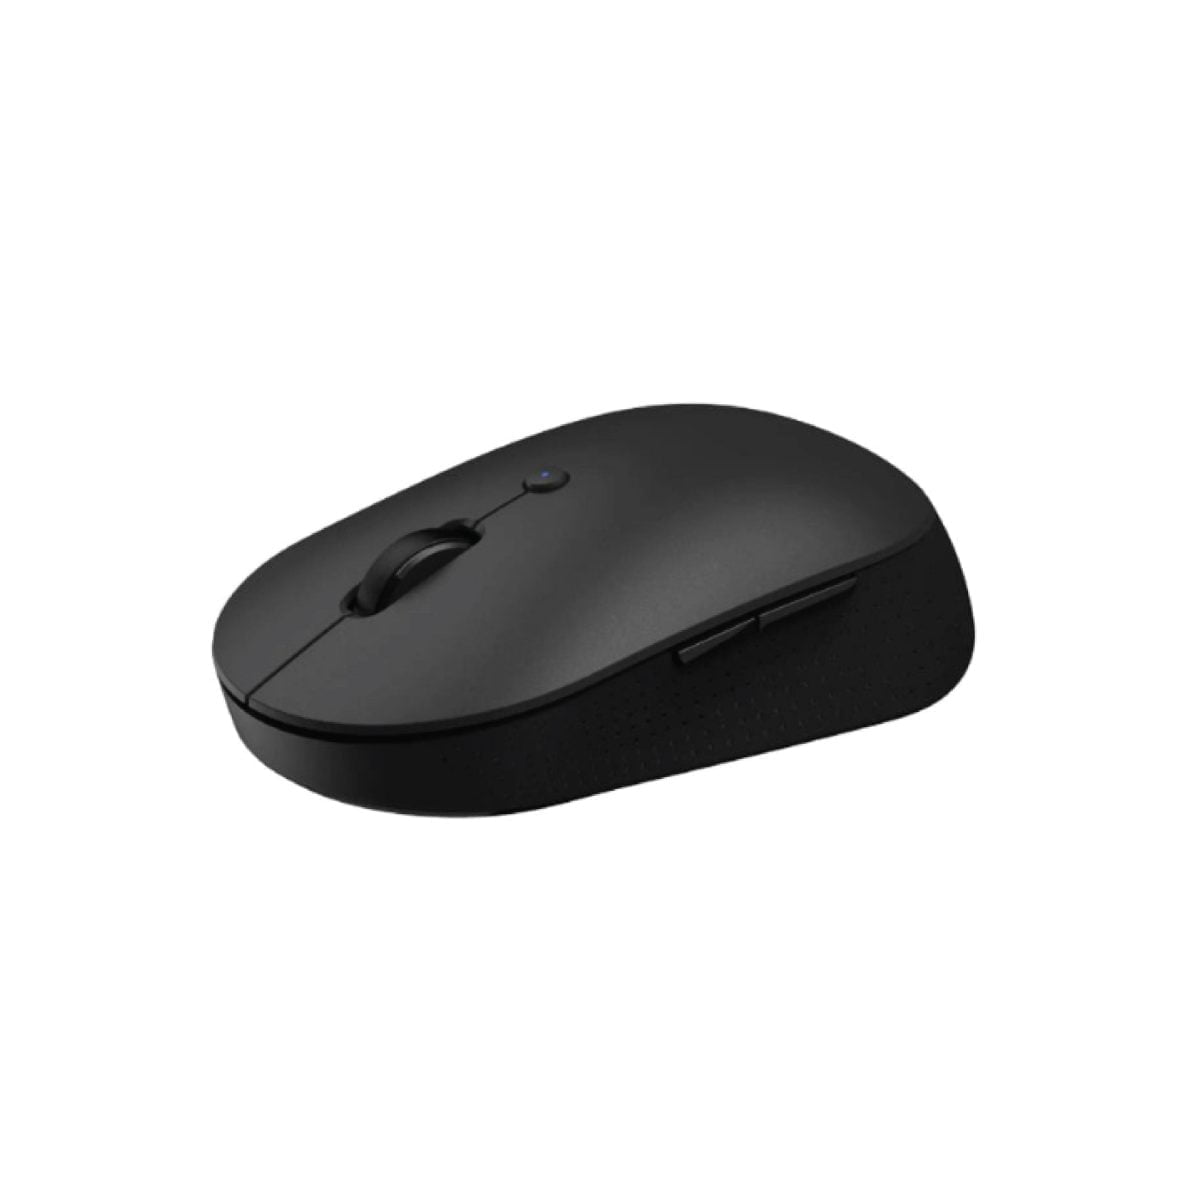 Eqwas 01 Scaled Xiaomi Bluetooth + 2.4Ghz Dual-Mode Connection, Which Can Be Switched Between Two Computers Freely, Silent Button Design, Don'T Worry About Disturbing Others Xiaomi Mi Dual Mode Wireless Mouse Silent Edition Black (1300Dpi)